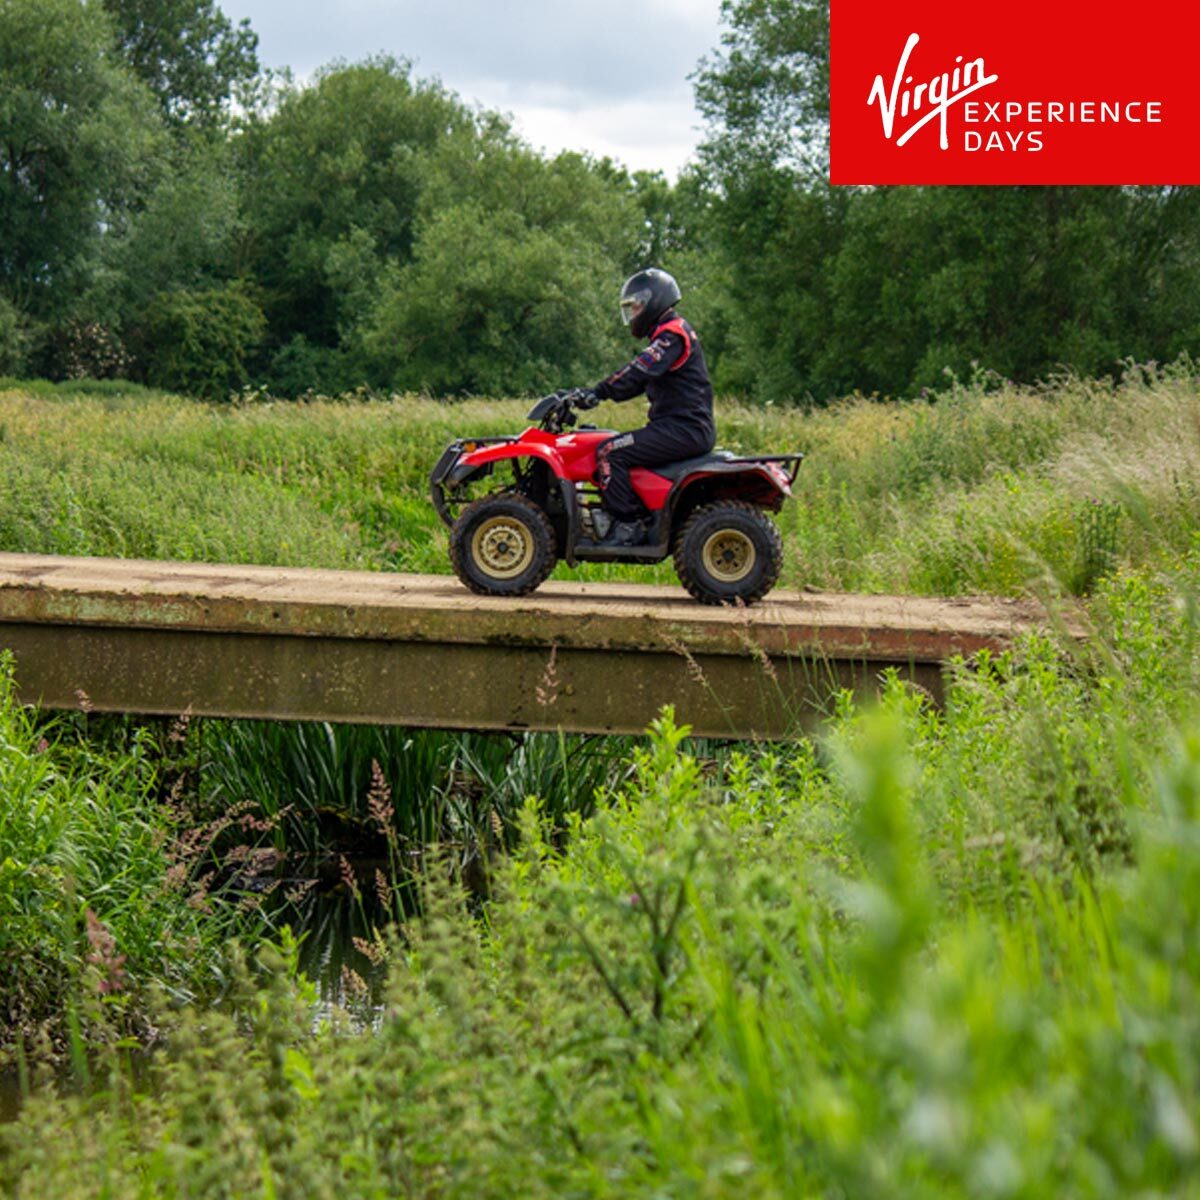 Buy Virgin Experience Quad Biking for 2 Image5 at Costco.co.uk